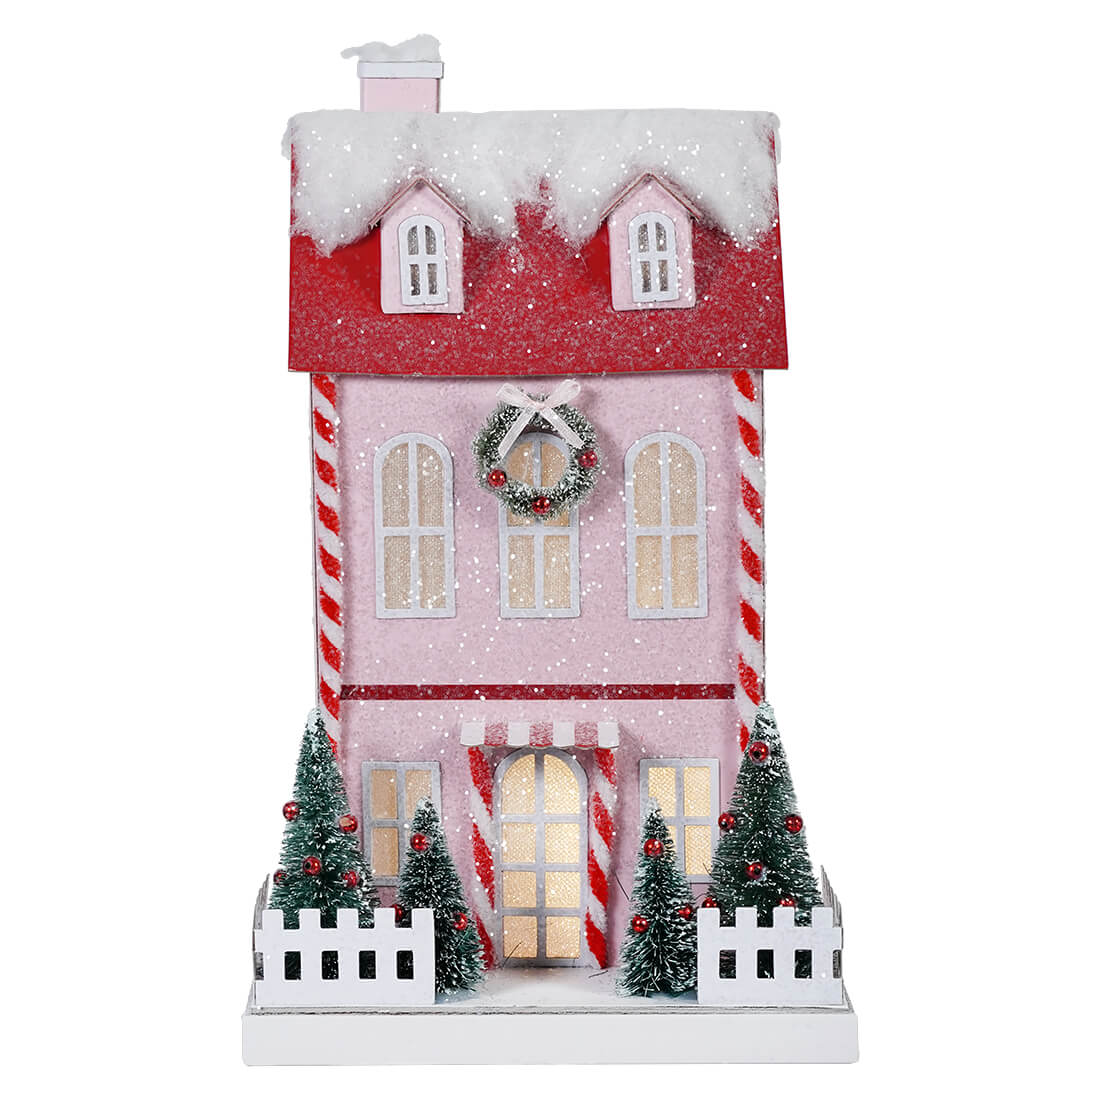 Lighted Winter Candy Cane Pink Paper House